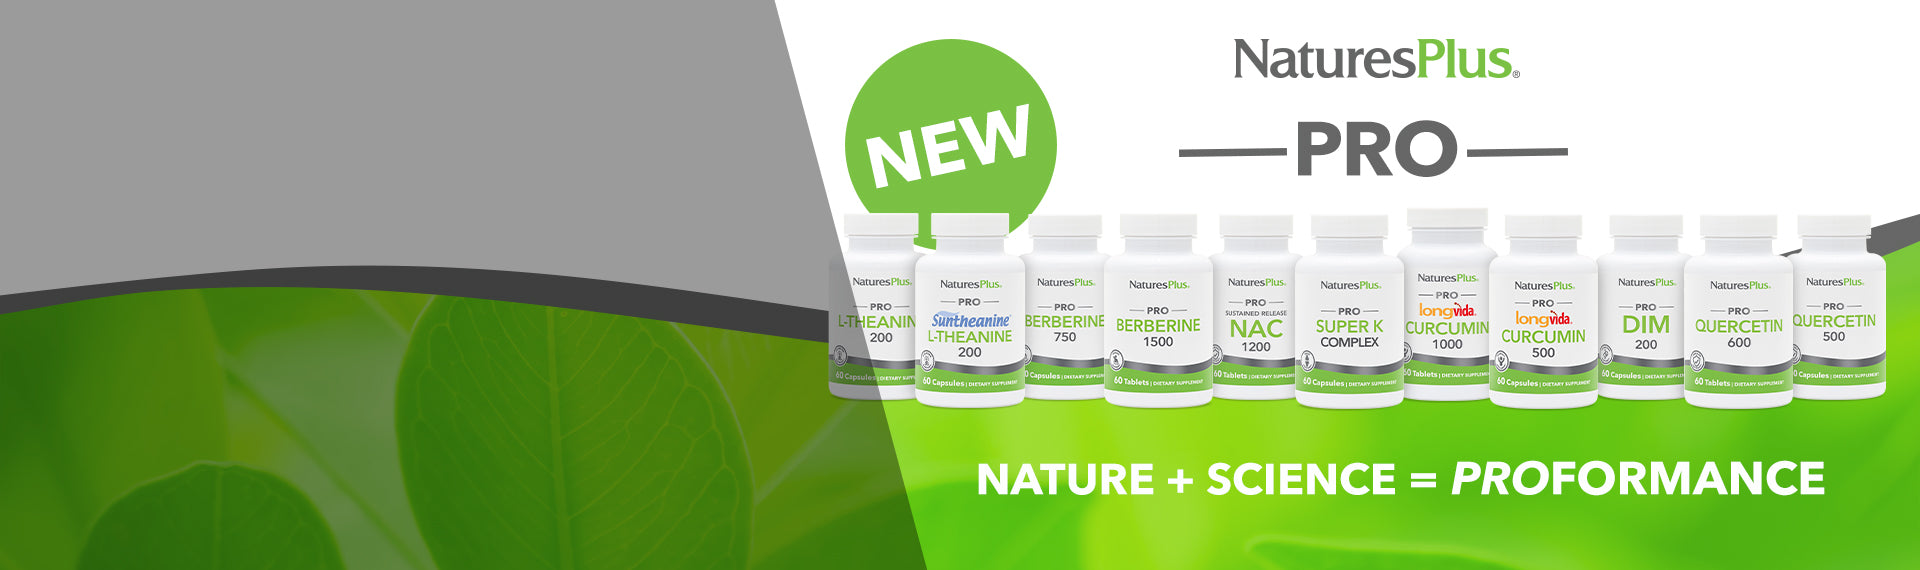 NEW POWERFUL, EFFECTIVE, PROFESSIONAL-LEVEL PRODUCTS FROM NATURESPLUS! 